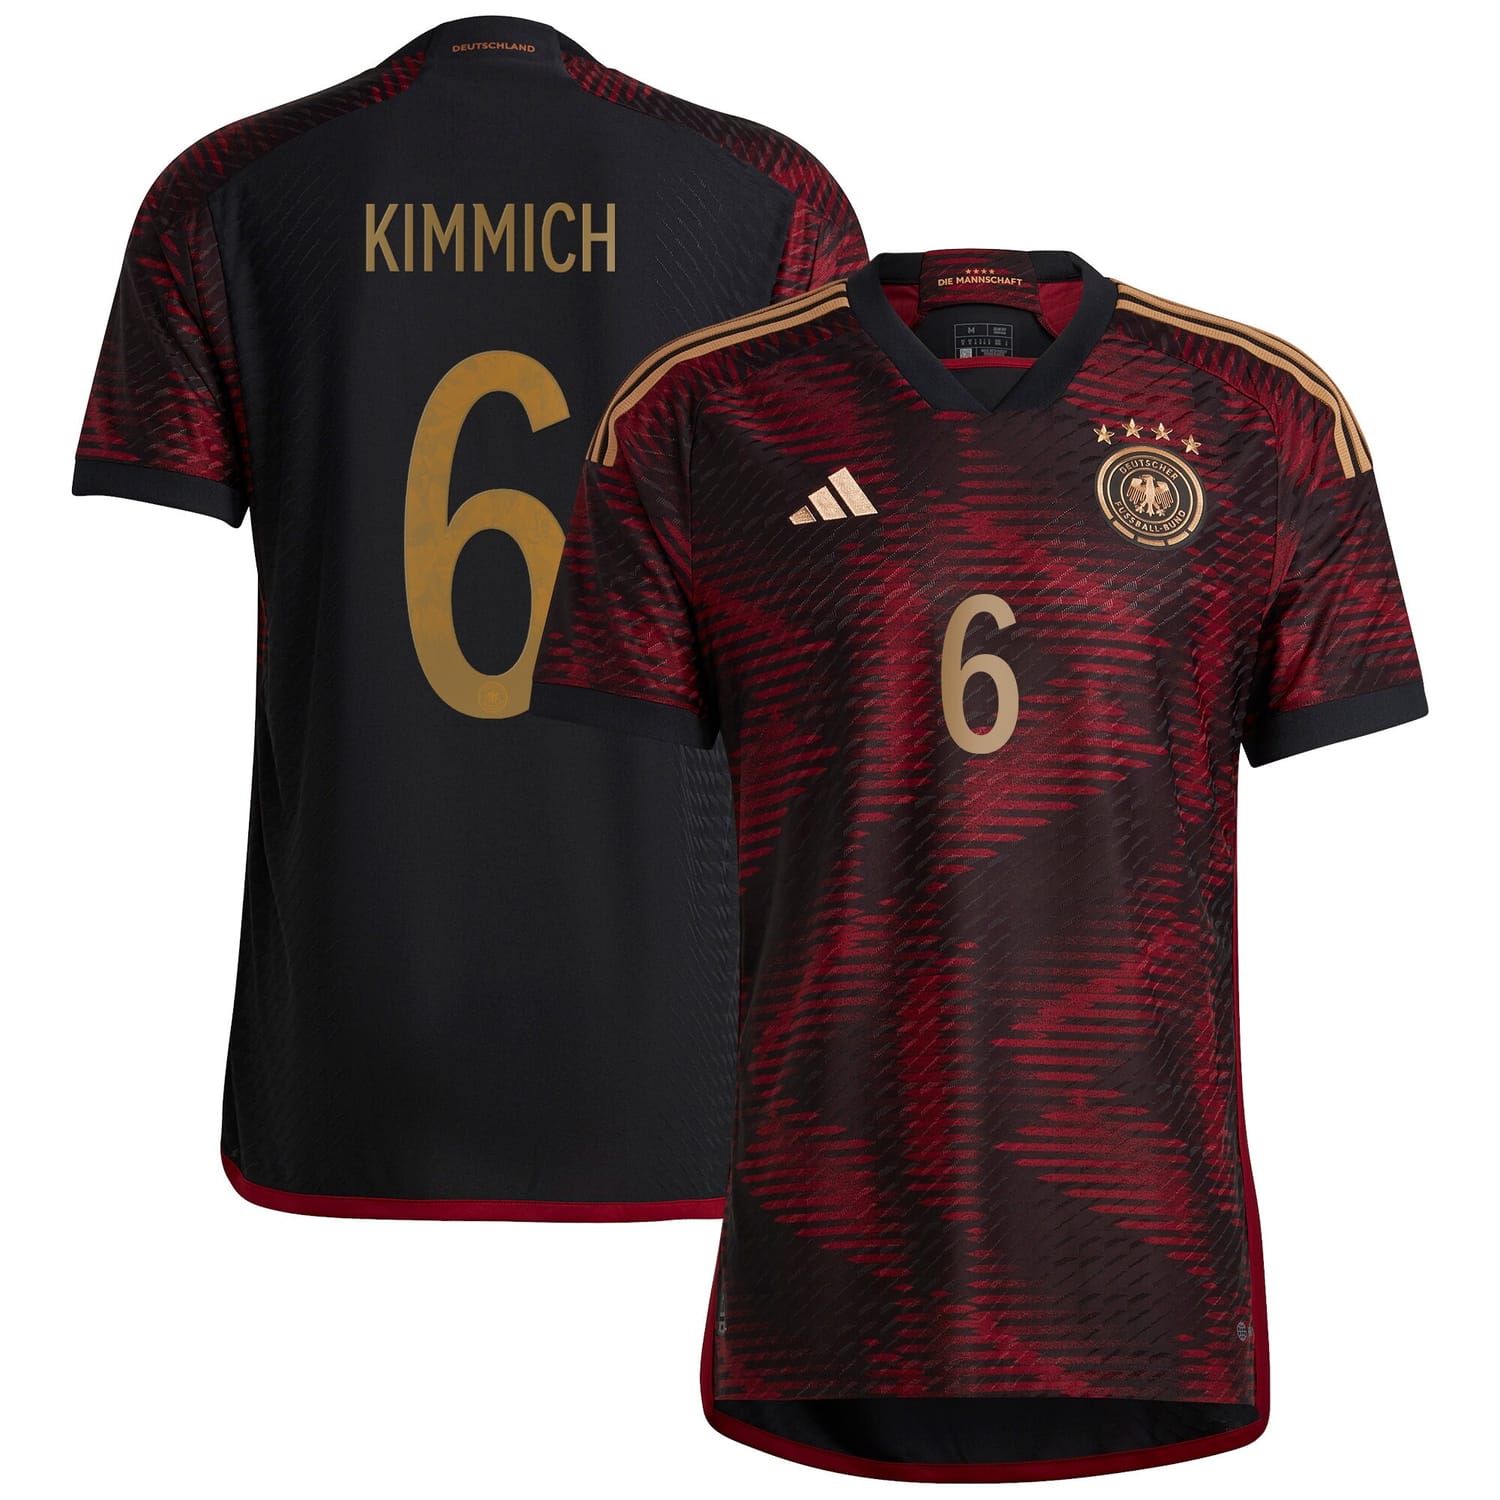 Germany National Team Away Authentic Jersey Shirt player Joshua Kimmich 6 printing for Men